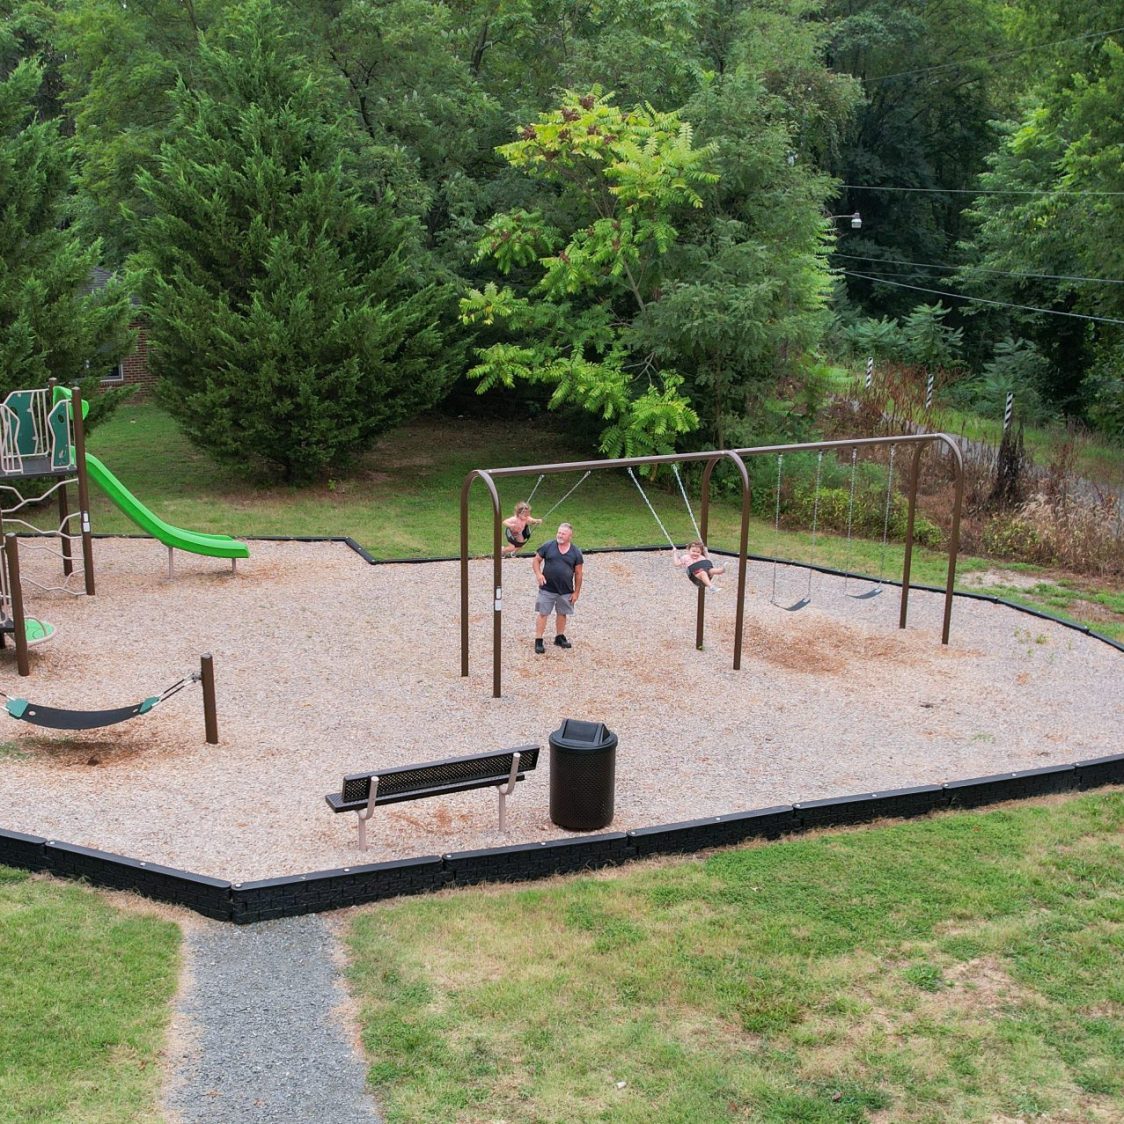 The playground provides a long-overdue option for caregivers in Montross, who used to have to drive 15-20 minutes to the nearest park.